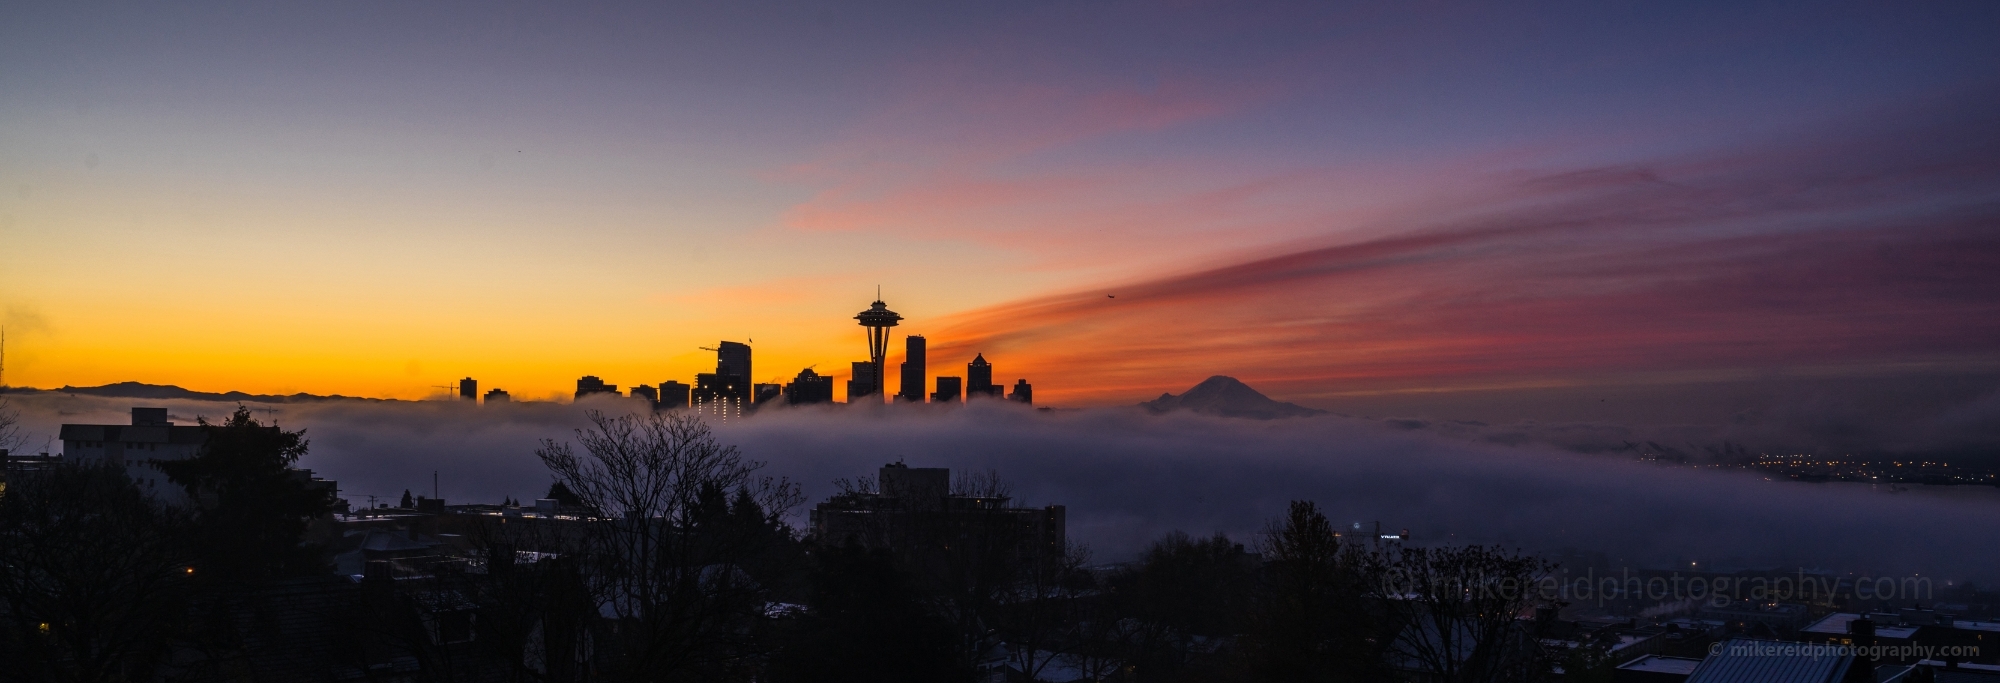 Seattle in the Fog at Sunrise